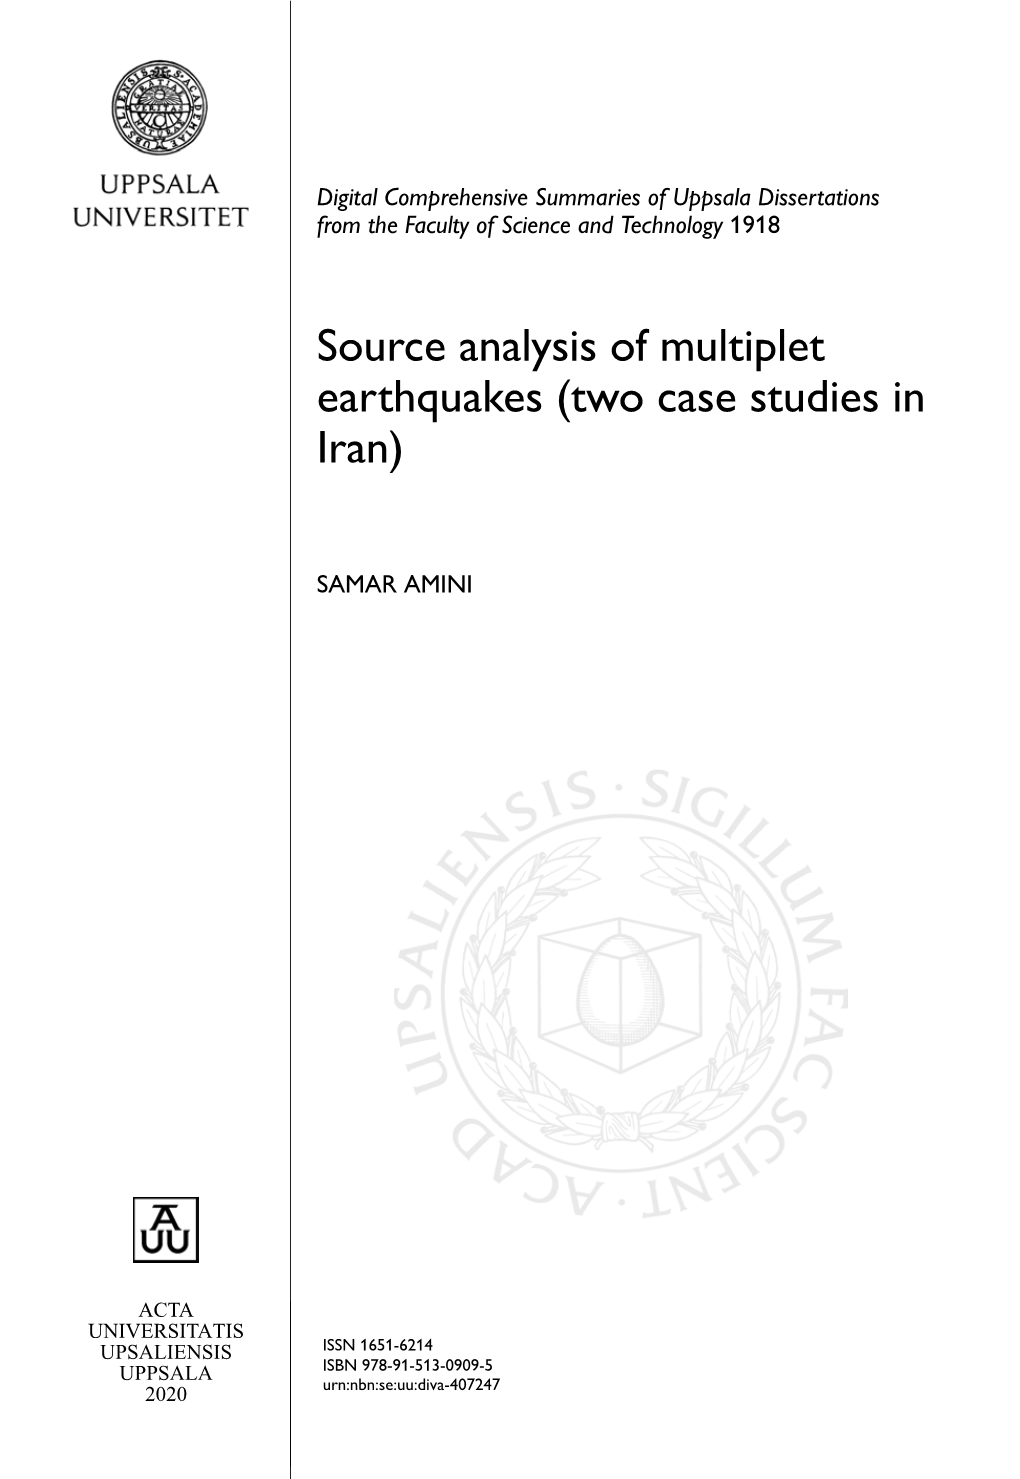 Source Analysis of Multiplet Earthquakes (Two Case Studies in Iran)